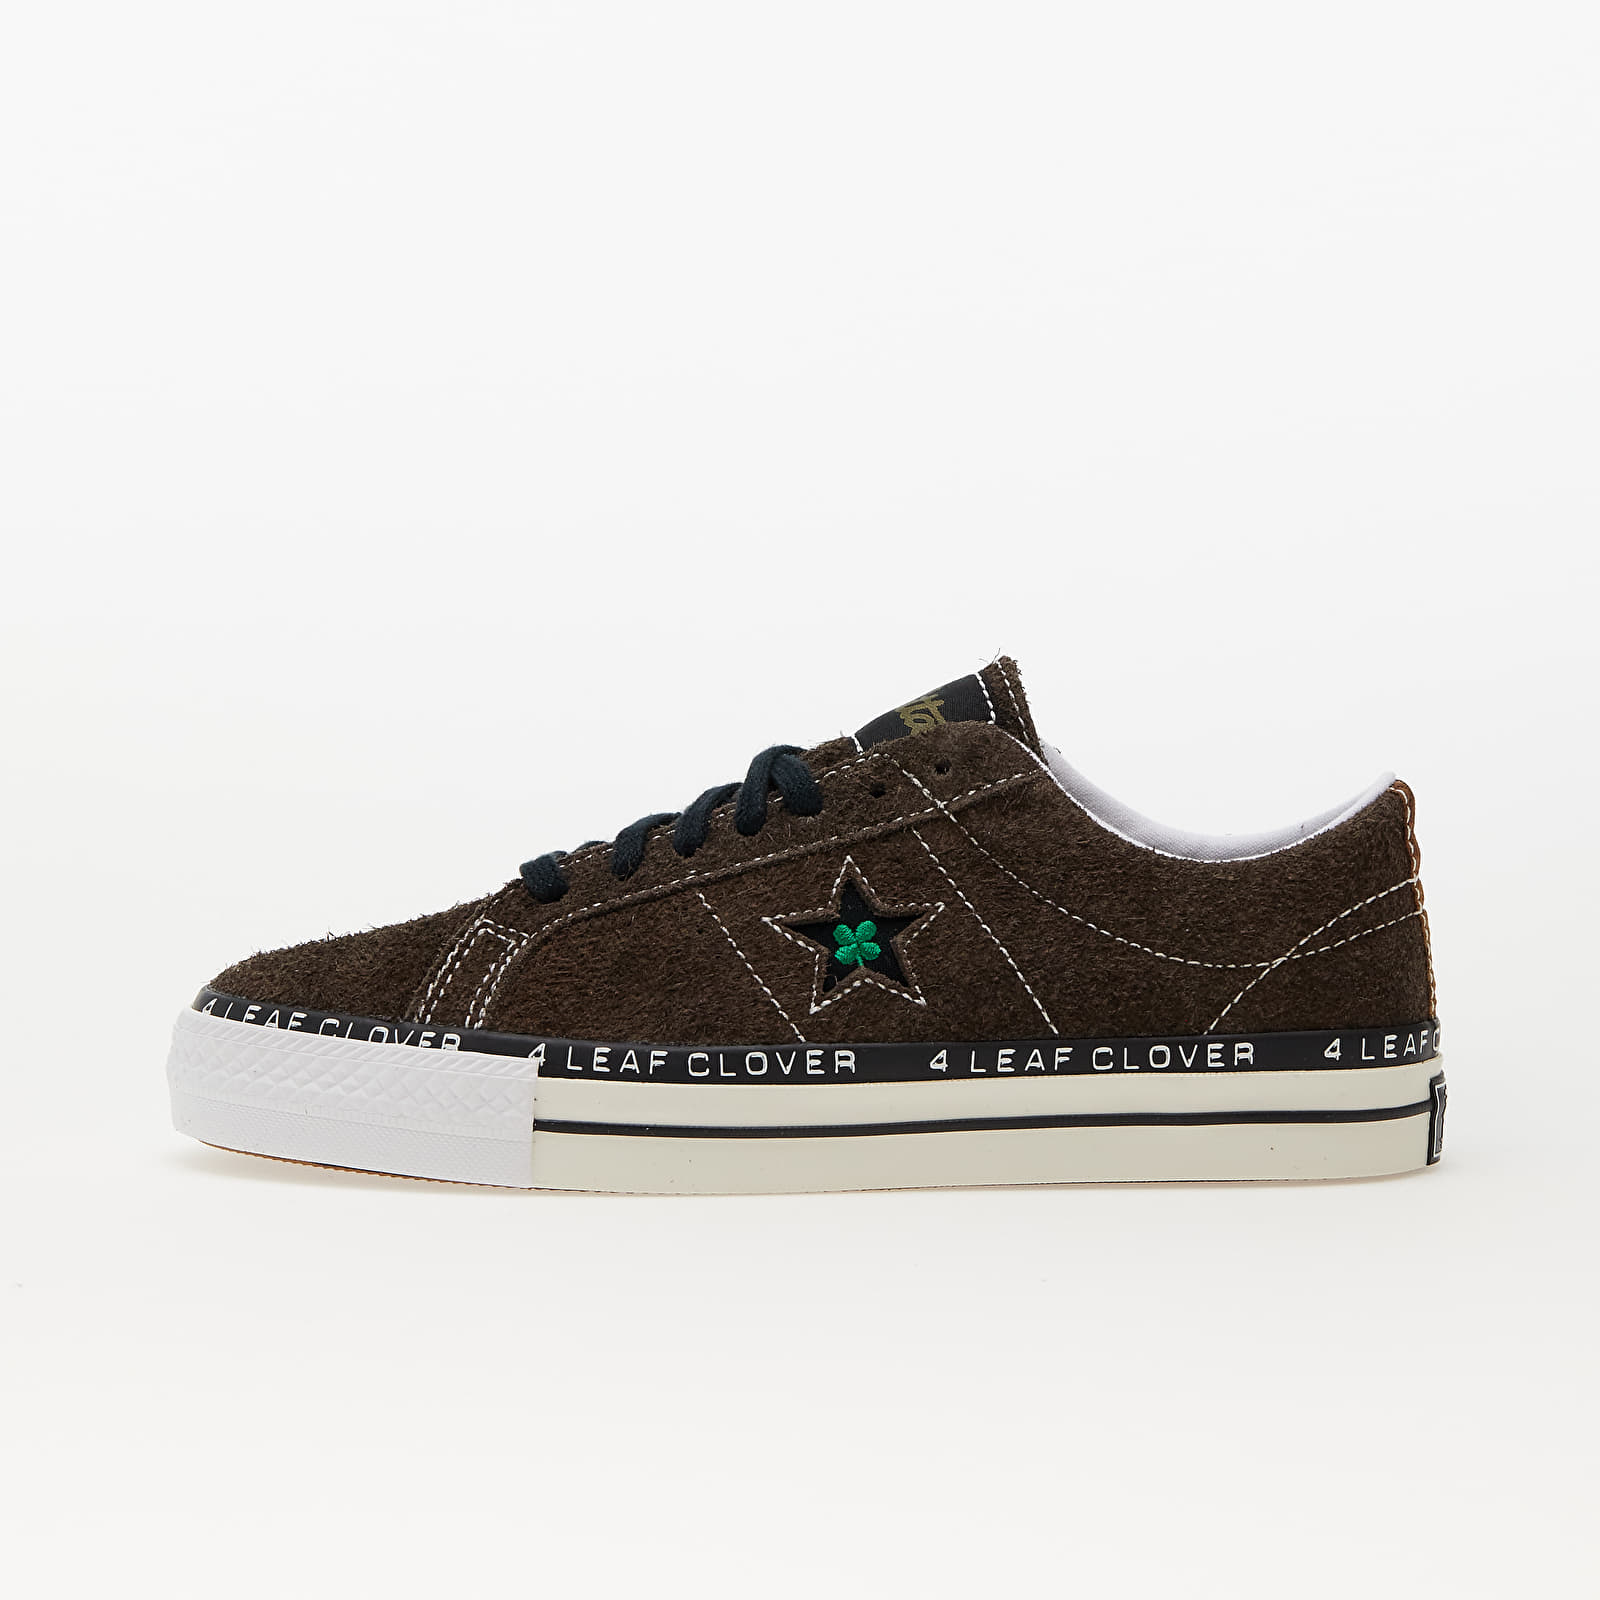 Men's shoes Converse x Patta One Star Pro OX Java/ Burnt Olive/ White